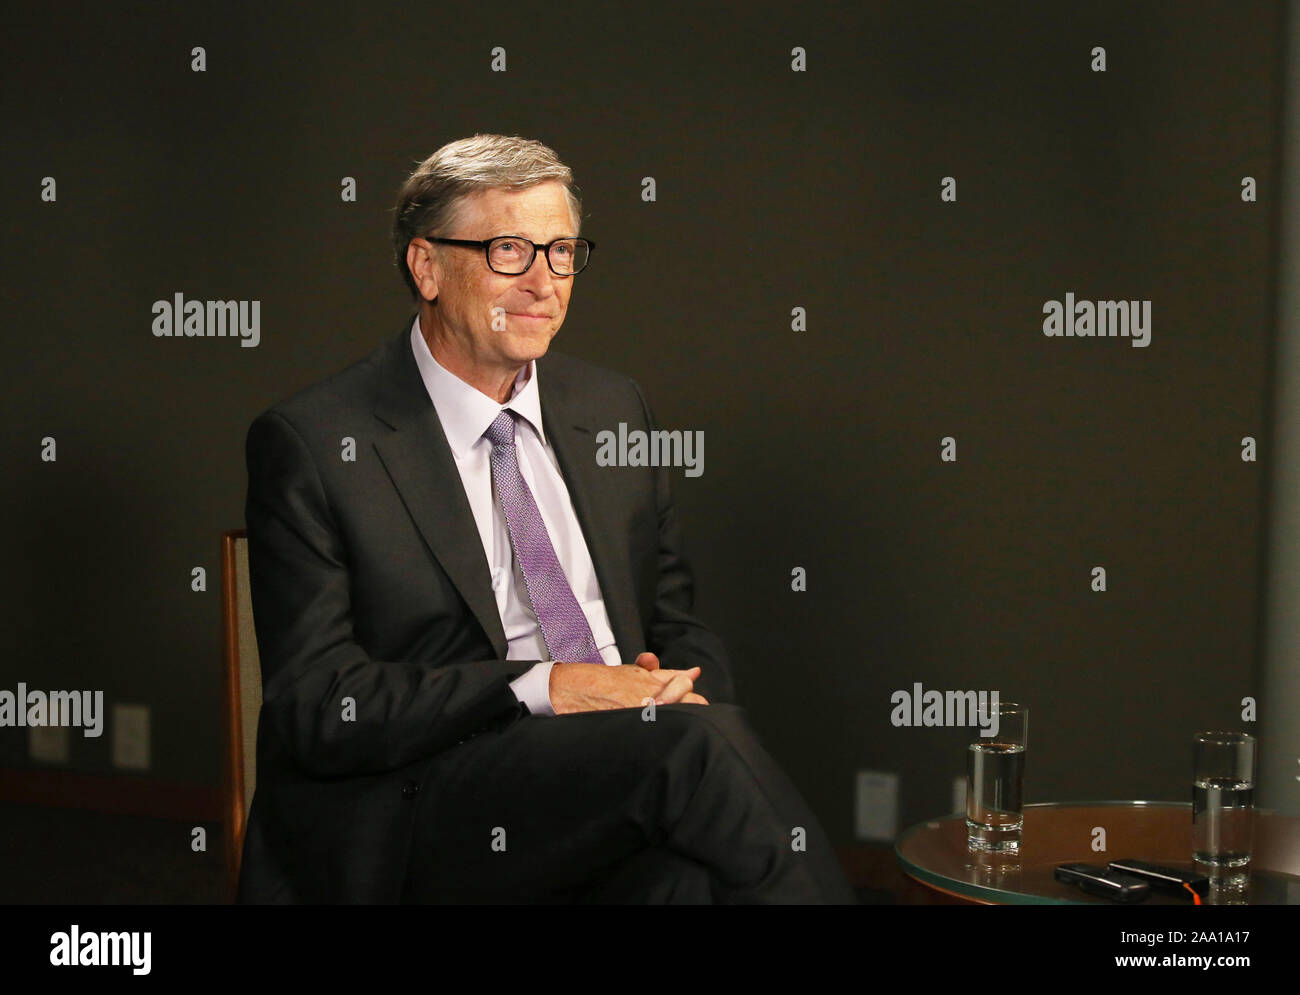 Seattle, USA. 18th Nov, 2019. Bill Gates, co-chair of the Bill & Melinda Gates Foundation, receives an exclusive interview with Xinhua in Seattle, the United States, on Nov. 13, 2019. China has made remarkable progress in improving health equity and reducing poverty, offering lessons that could help other developing countries, including in Africa, accelerate their development, Bill Gates has said. Credit: Qin Lang/Xinhua/Alamy Live News Stock Photo